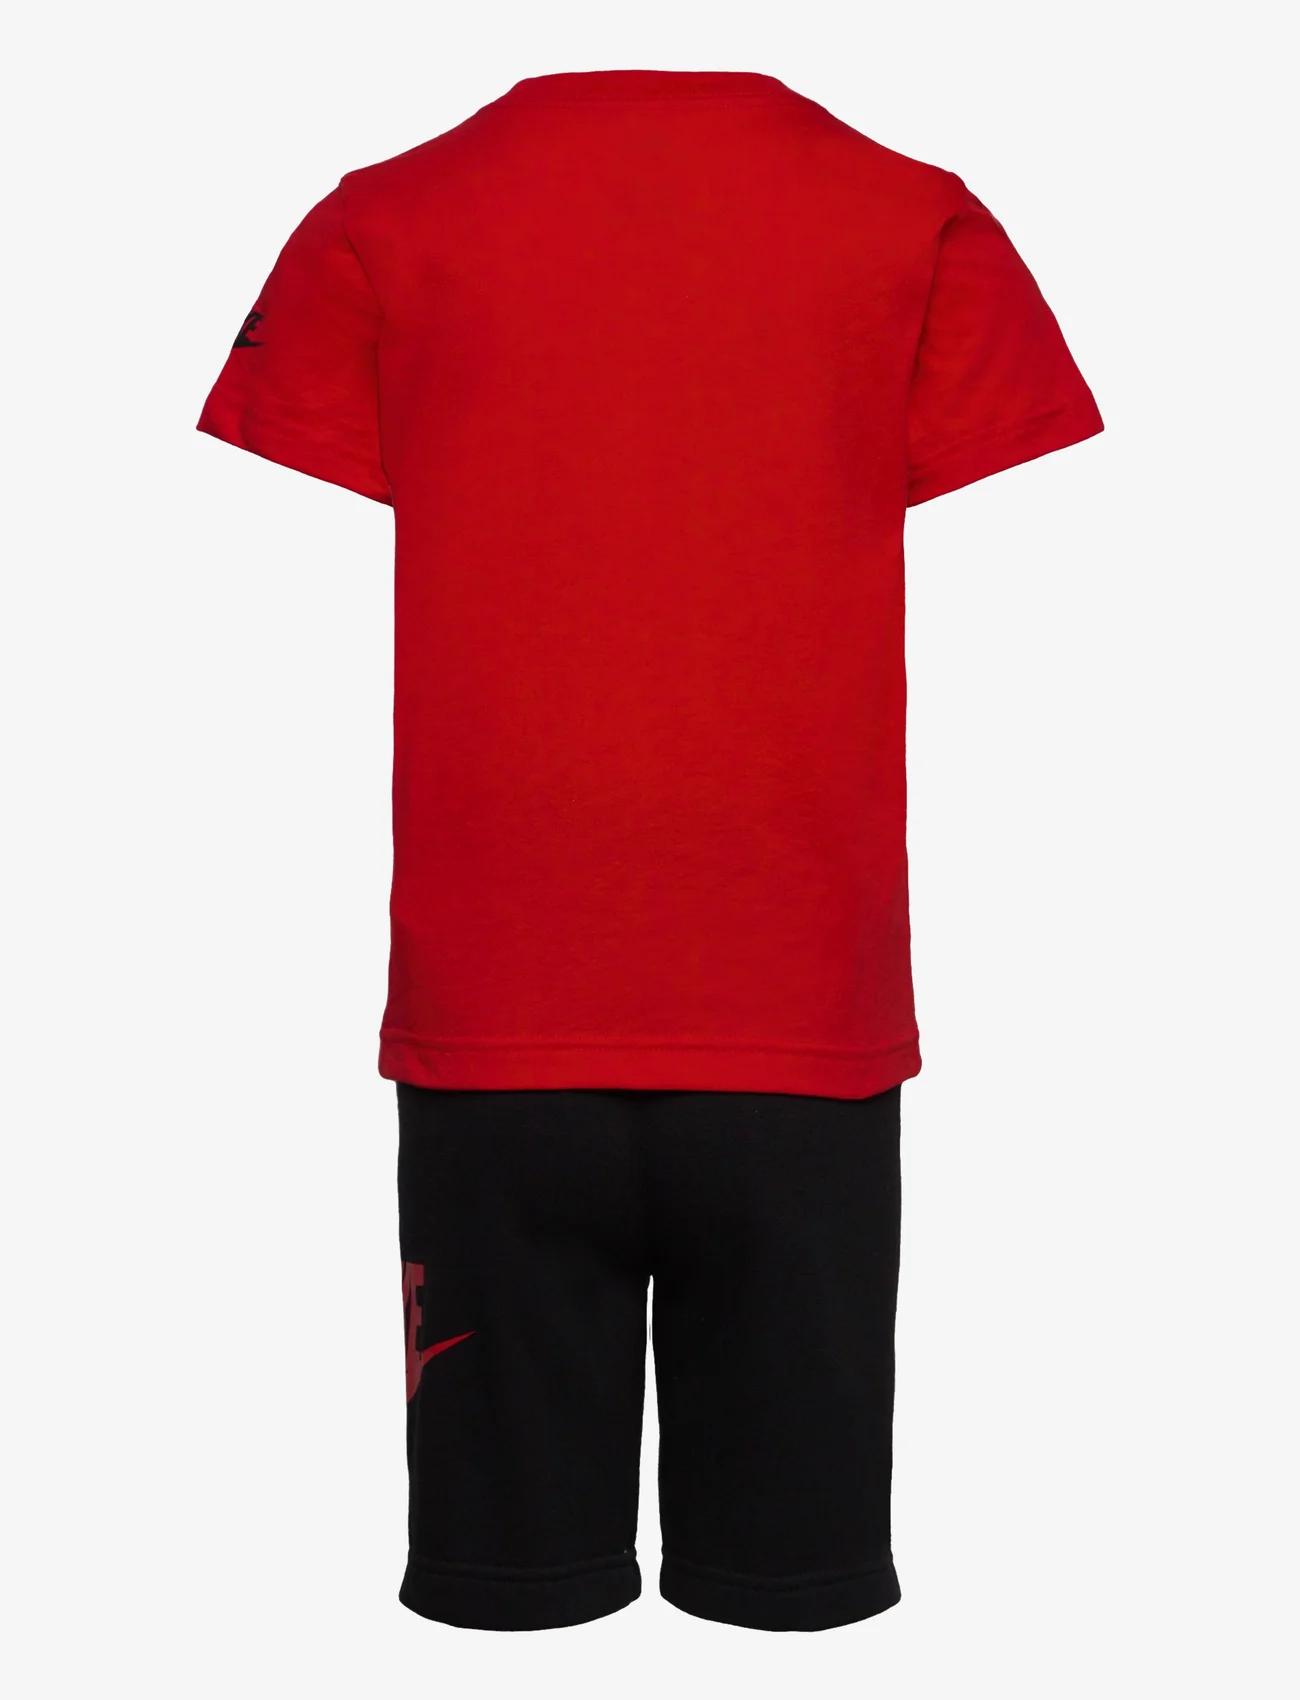 Nike - NSW FRENCH TERRY SHORT SET - lowest prices - black / university red) - 1